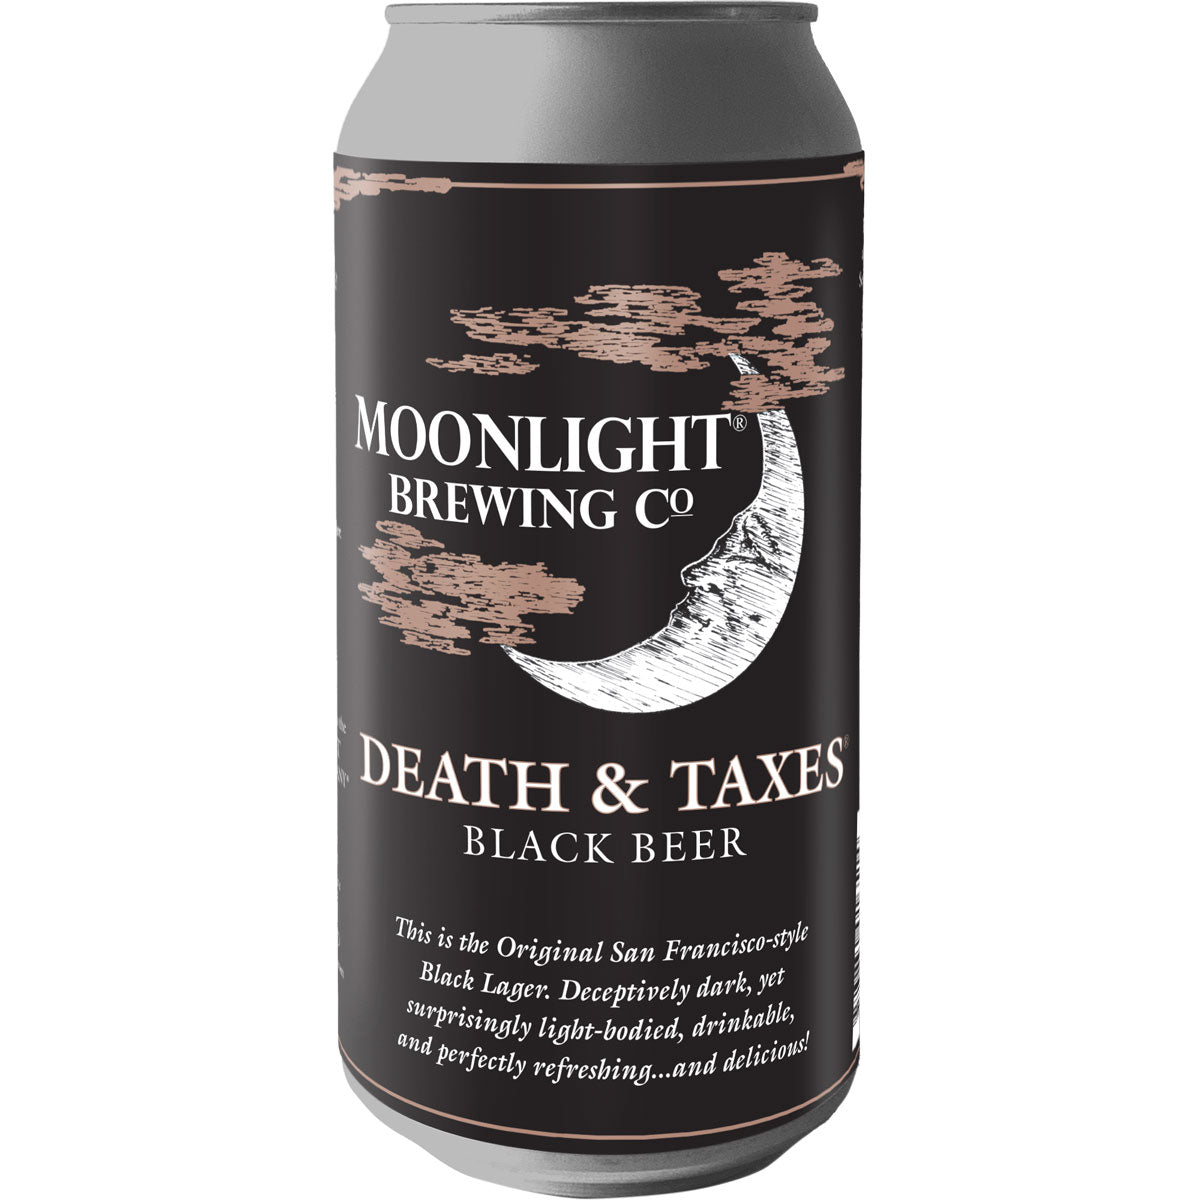 Death & Taxes Black Beer can image